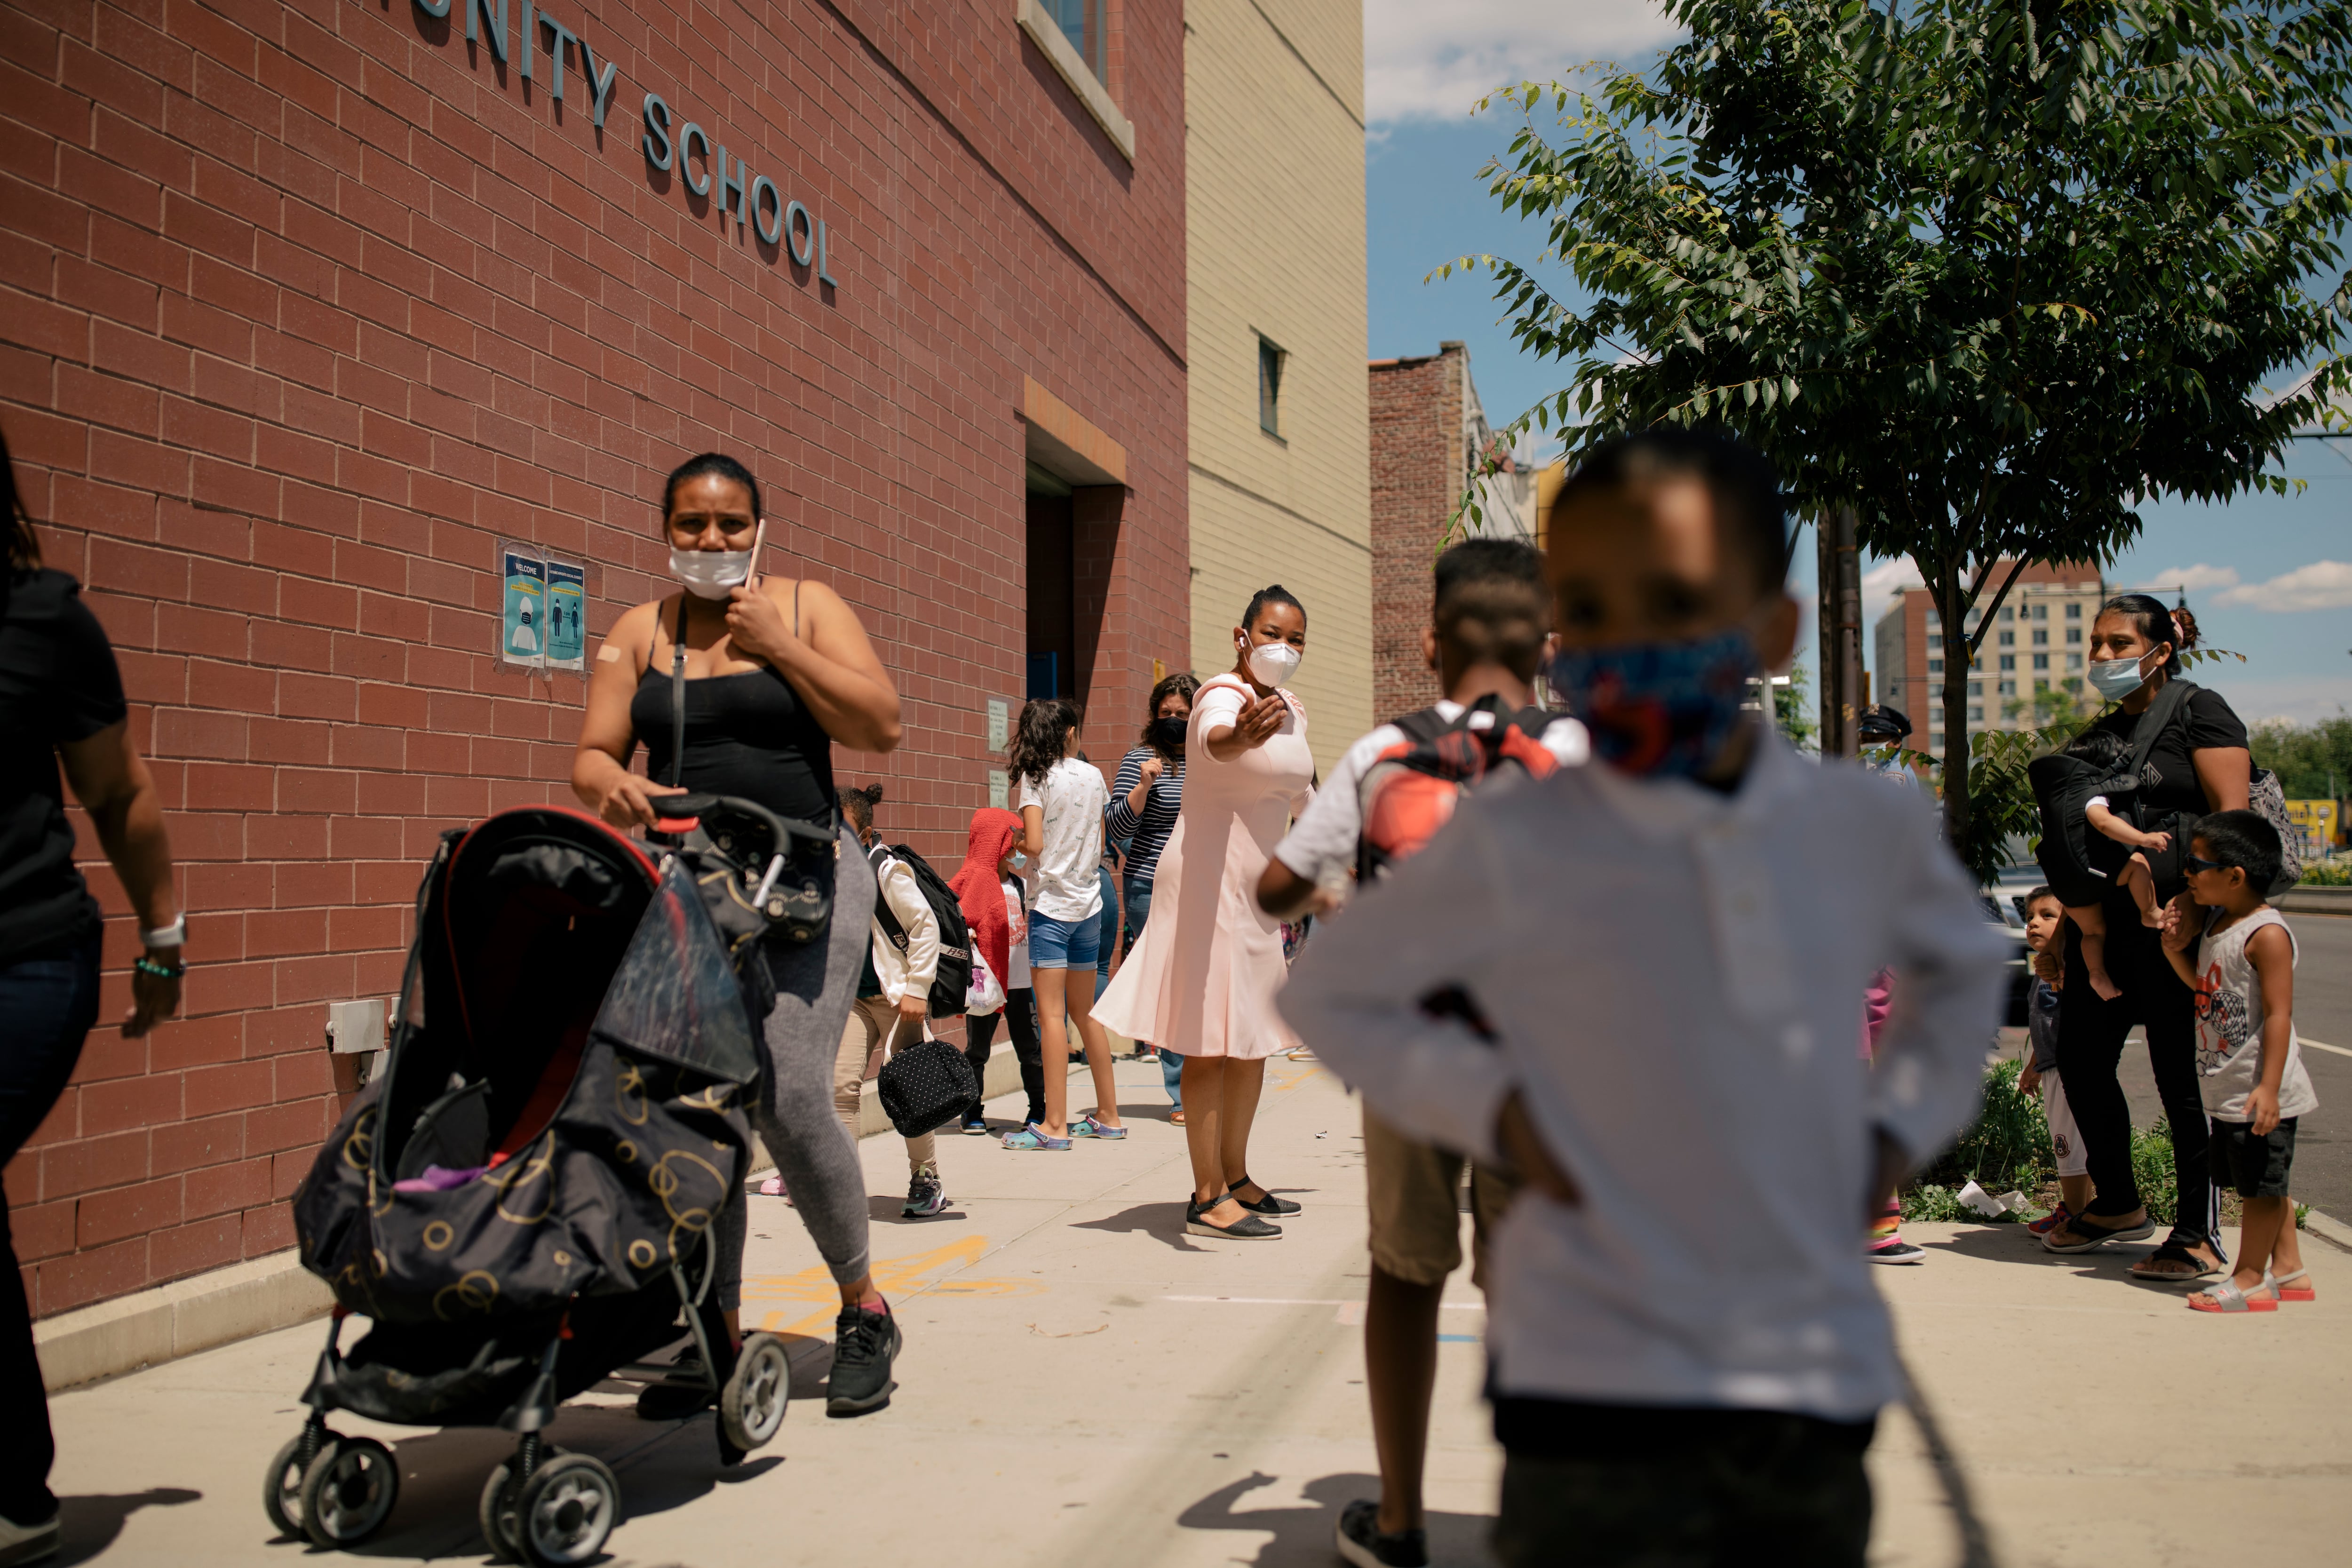 Students walk outside a school in Brooklyn. The school is brick, and a young student in a white shirt is in the foreground.